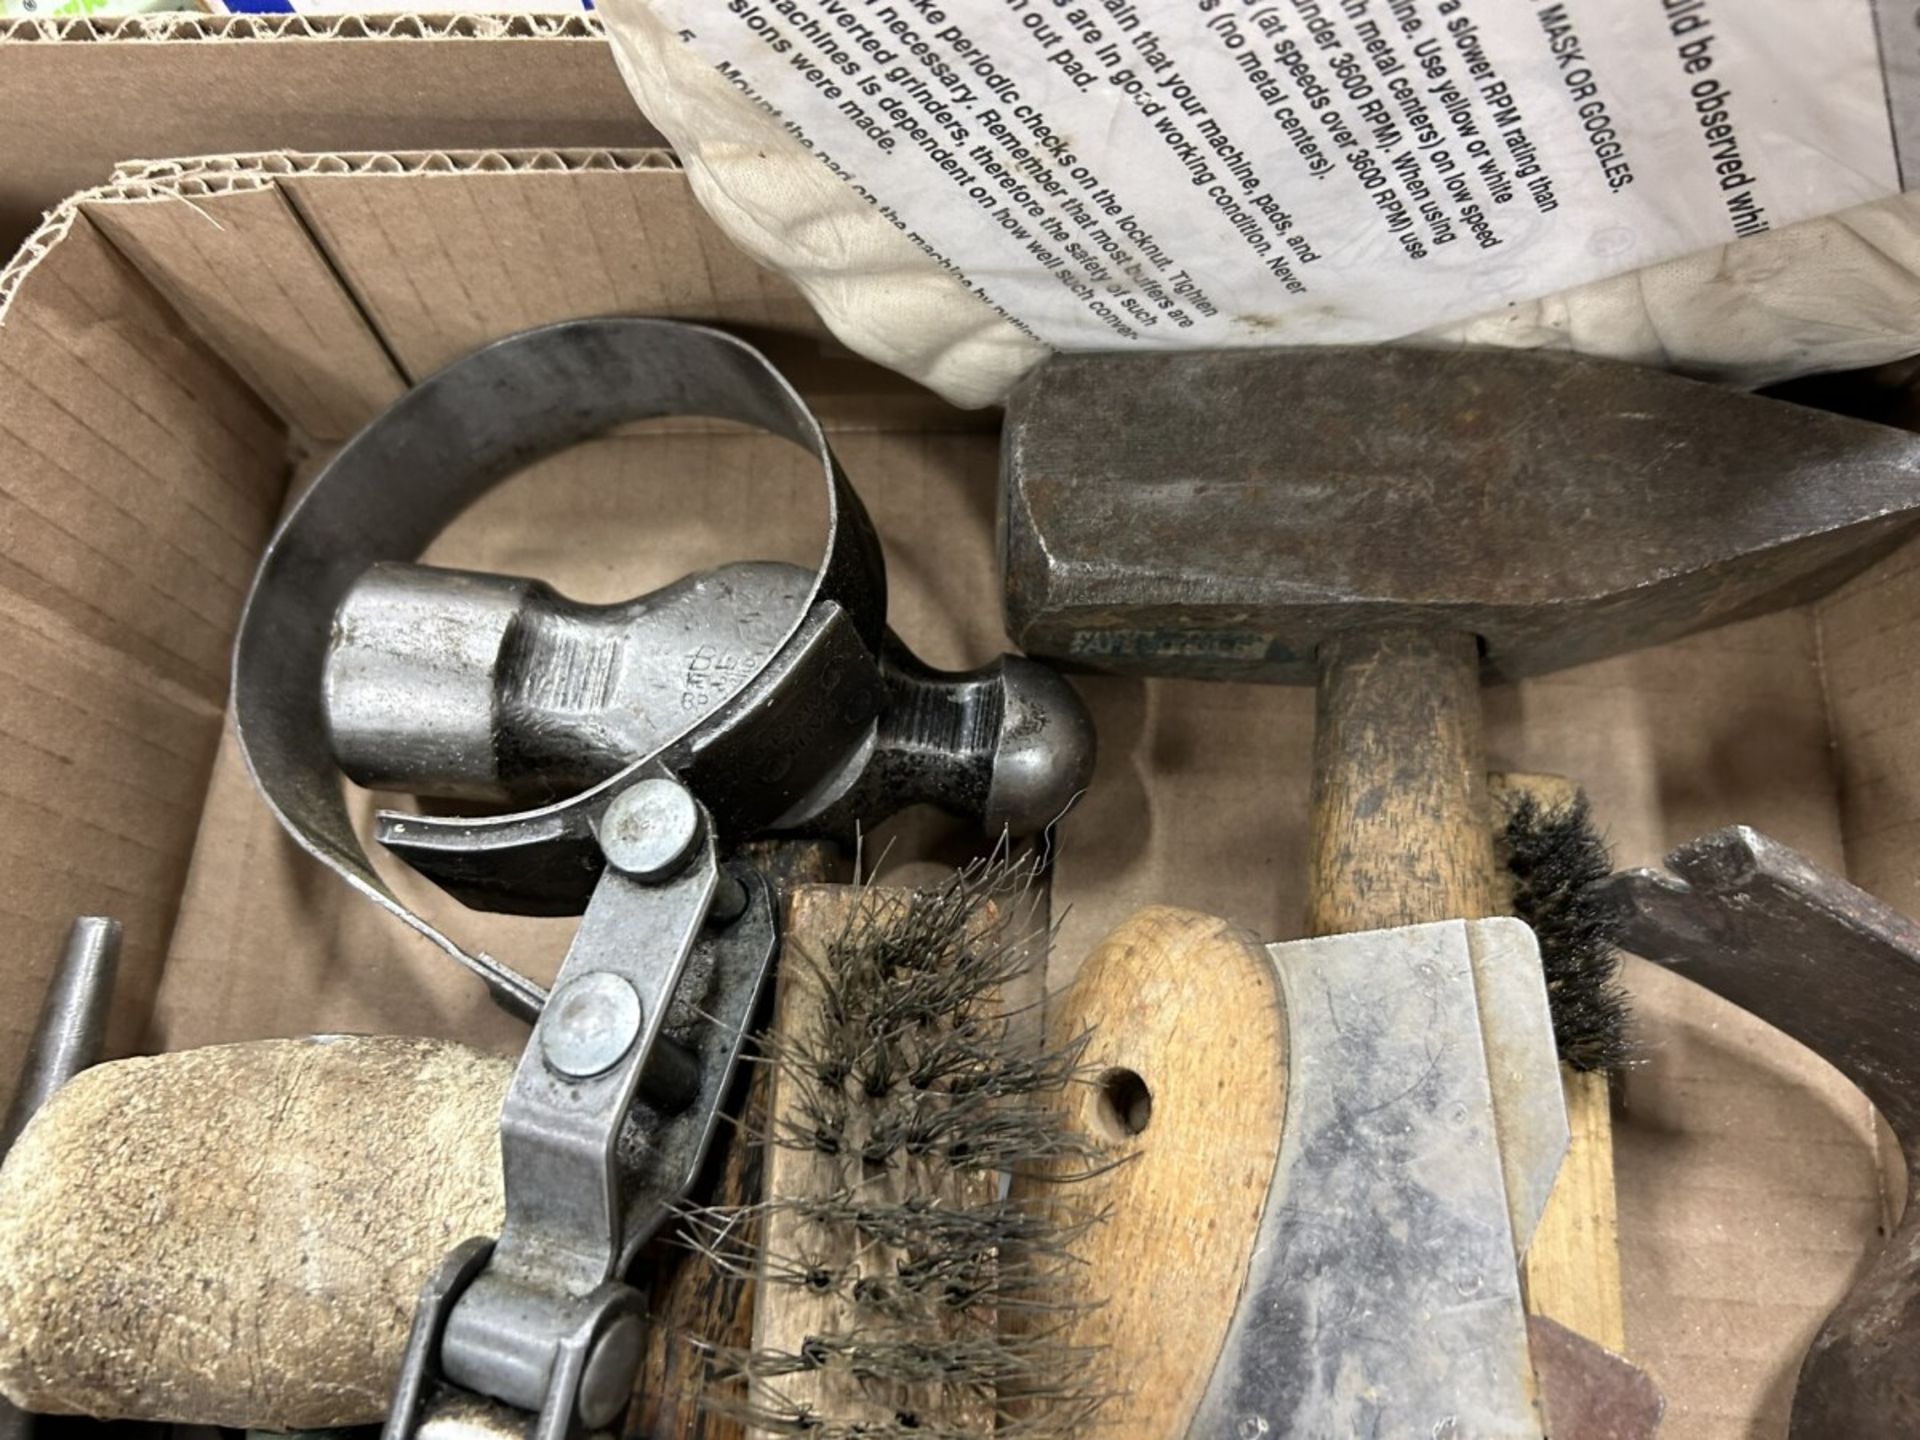 L/O ASSORTED HAND TOOLS-VICE GRIP, HAMMERS, OIL FILTER WRENCH ETC. - Image 2 of 3